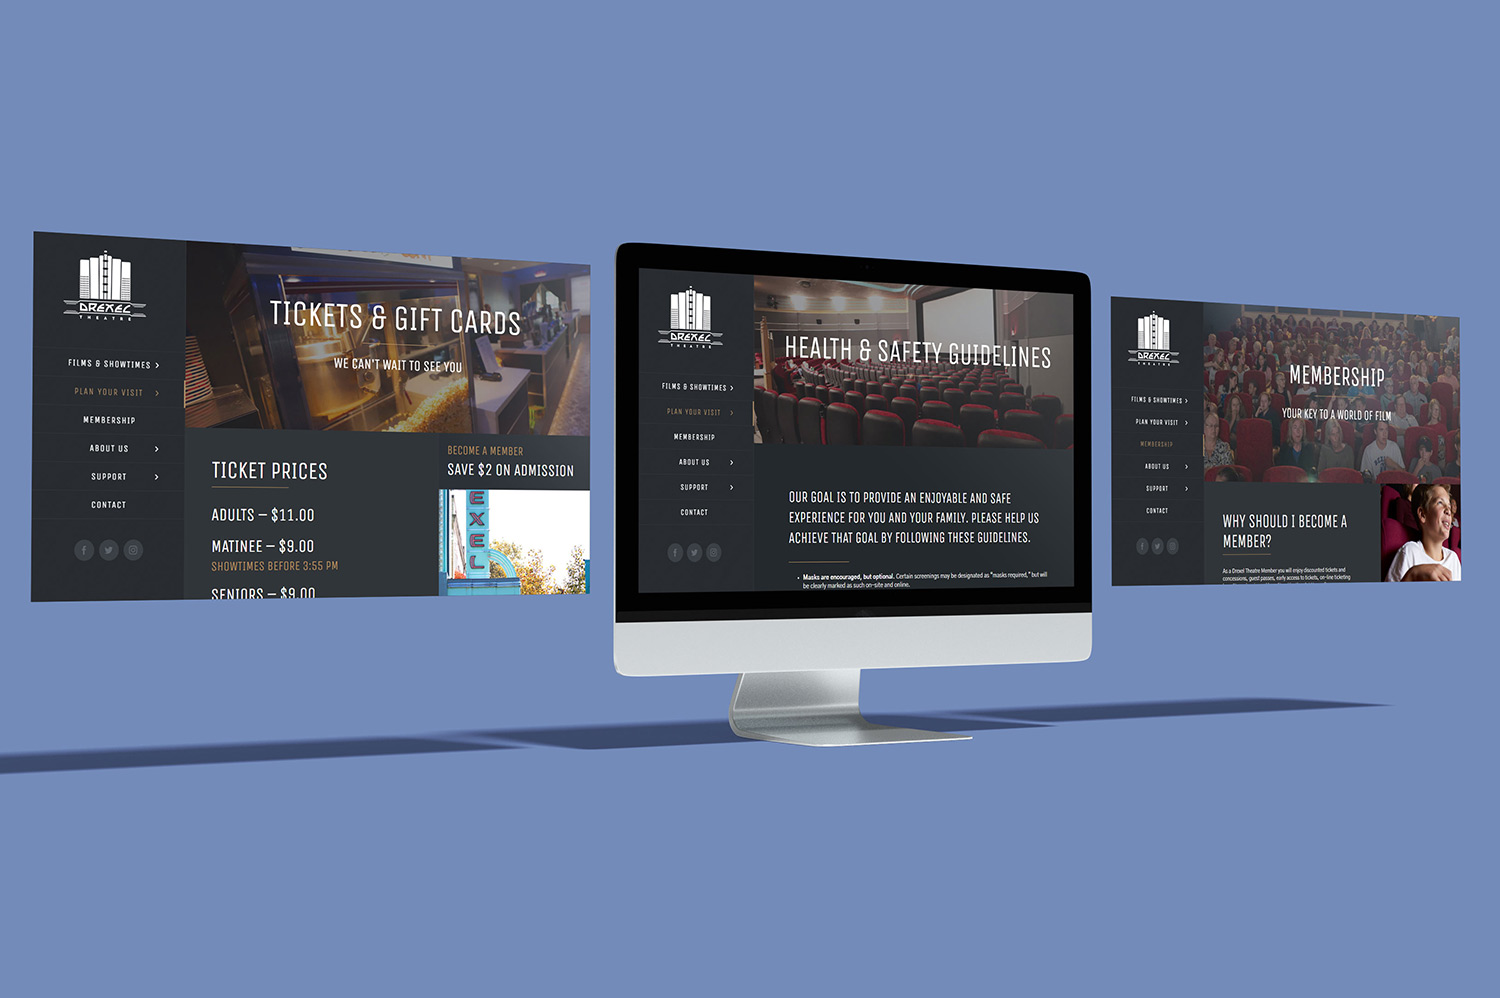 Drexel Theatre Website Redesign desktop screens with pages from the website